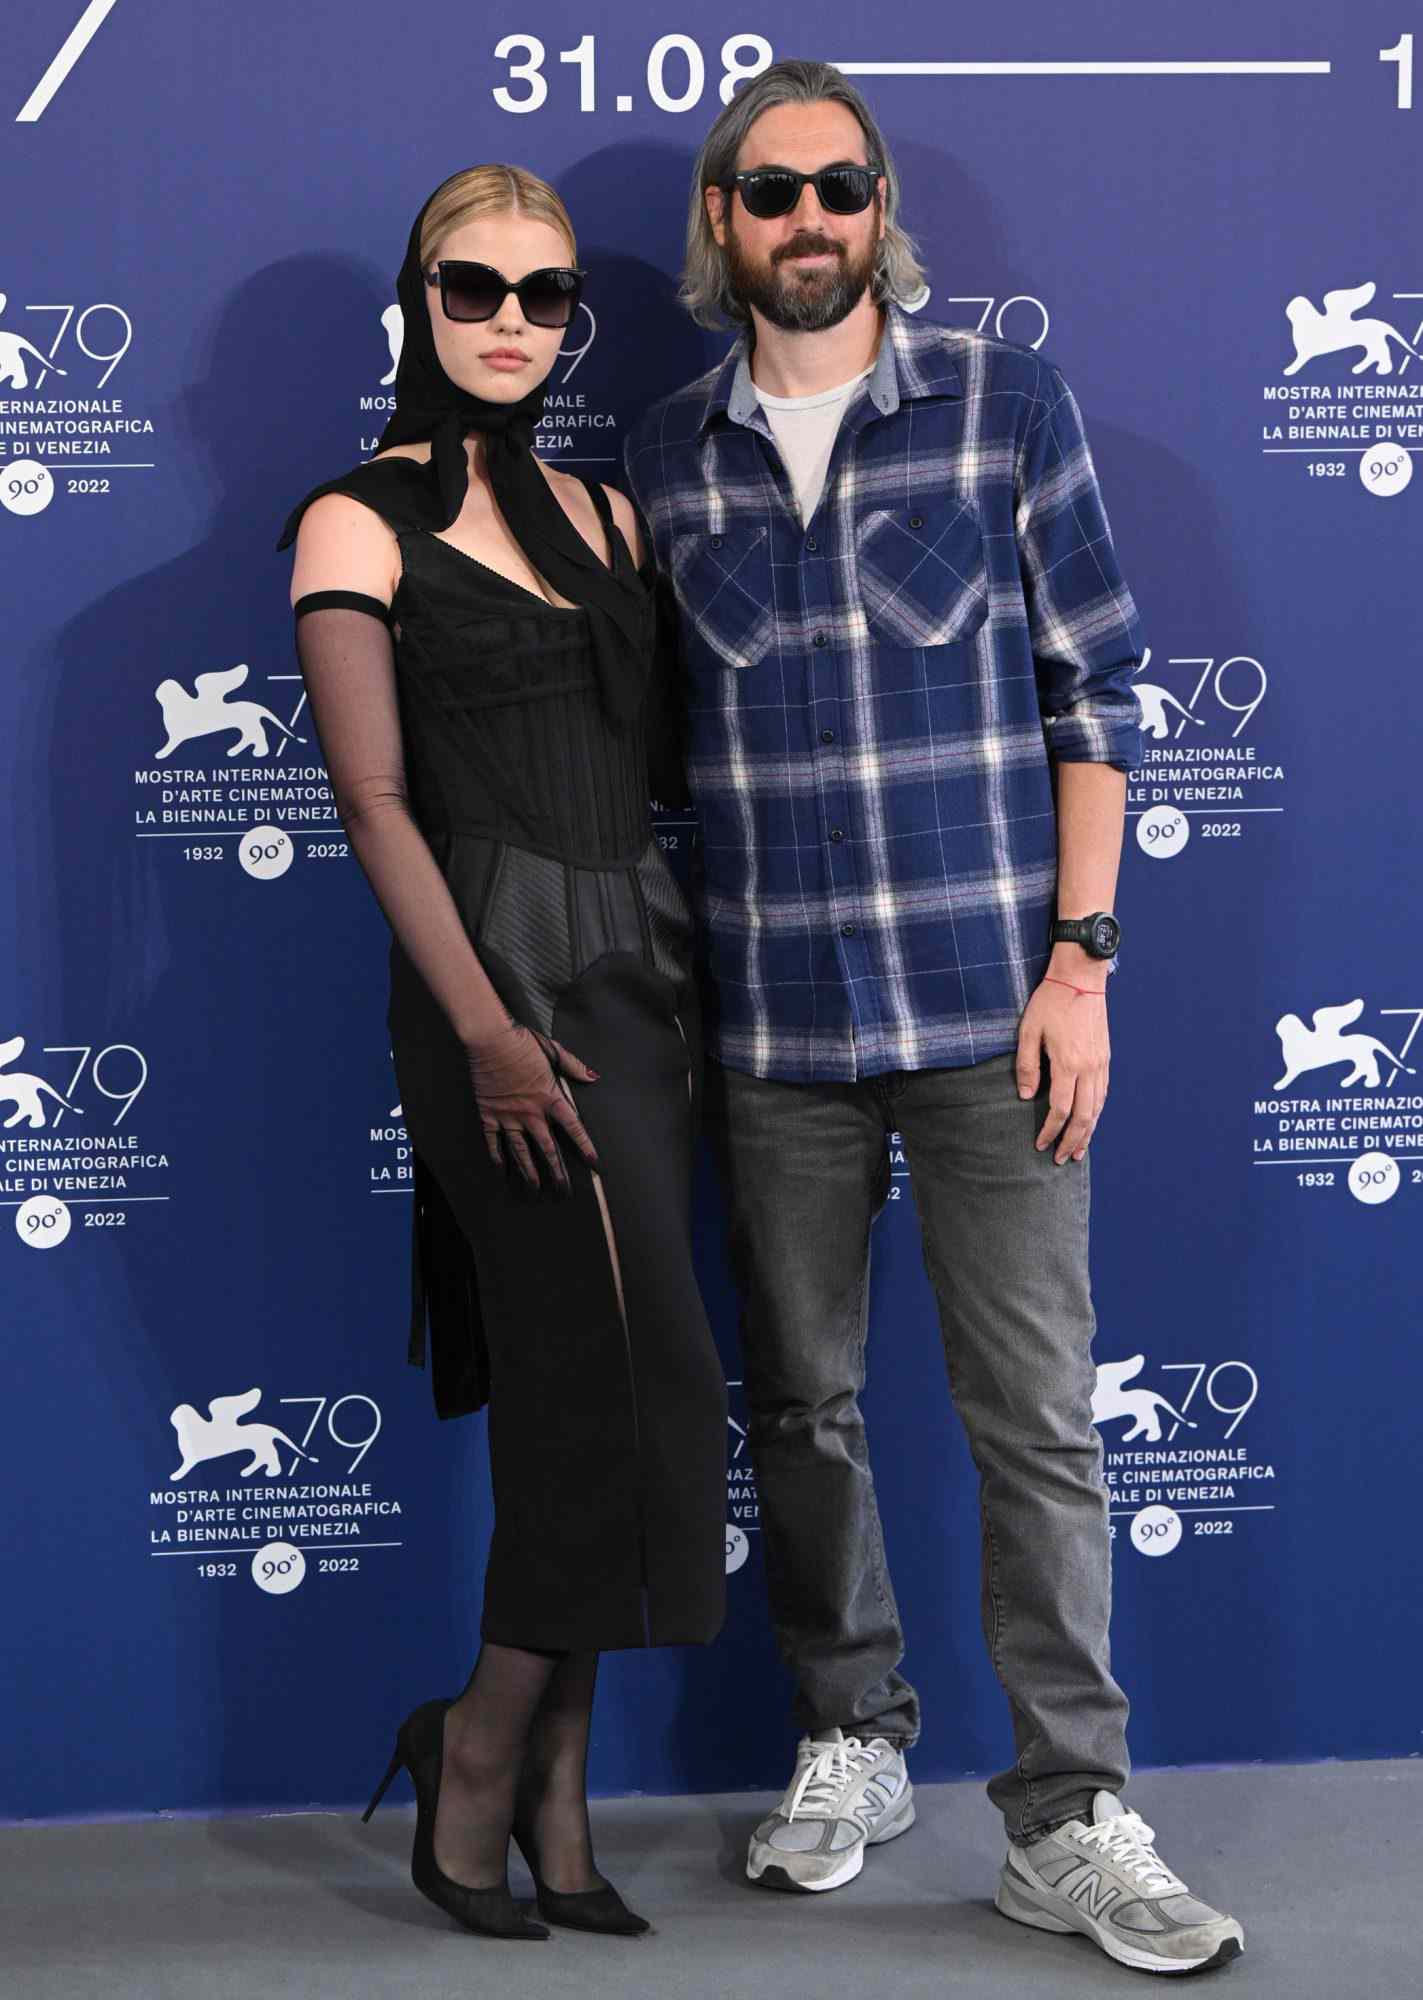 VENICE, ITALY - SEPTEMBER 03: Mia Goth and Director Ti West attend the photocall for "Pearl" at the 79th Venice International Film Festival on September 03, 2022 in Venice, Italy. (Photo by Stephane Cardinale - Corbis/Corbis via Getty Images)